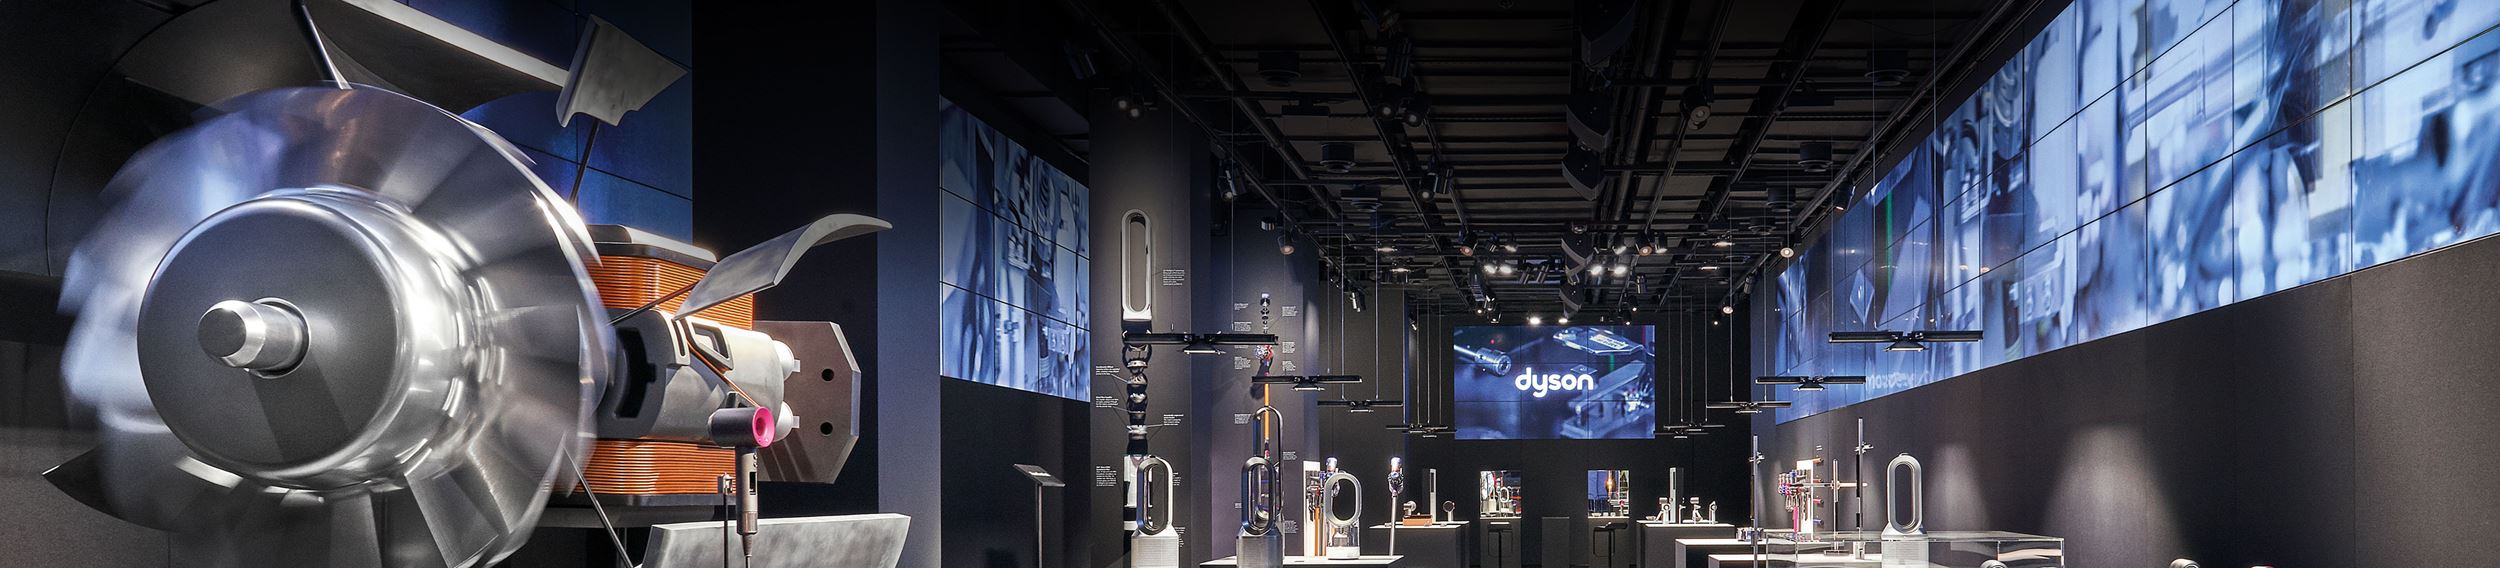 Image of Dyson store